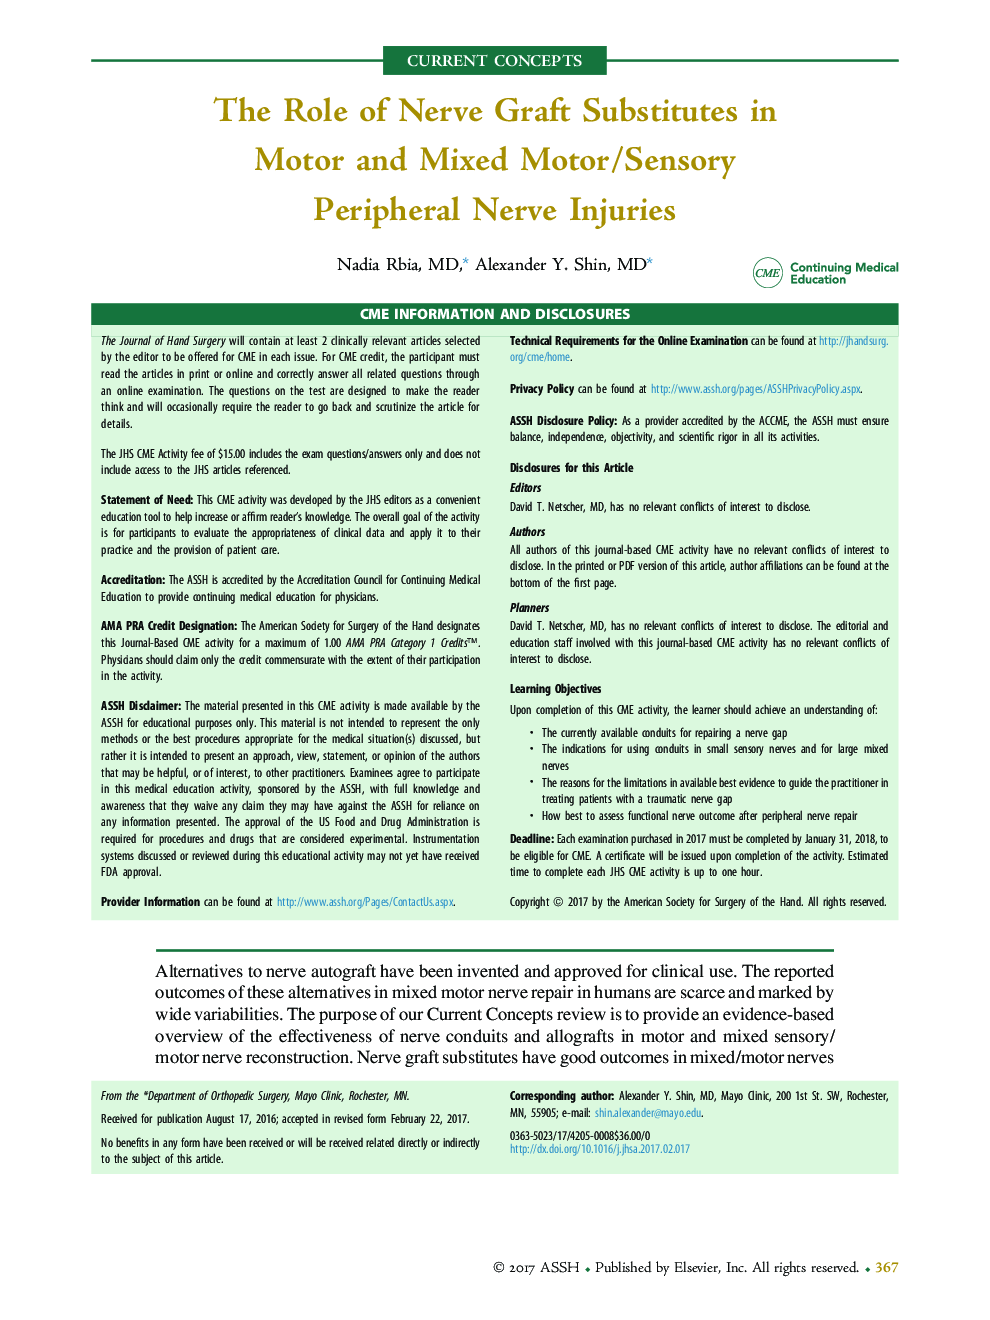 The Role of Nerve Graft Substitutes in Motor and Mixed Motor/Sensory Peripheral Nerve Injuries